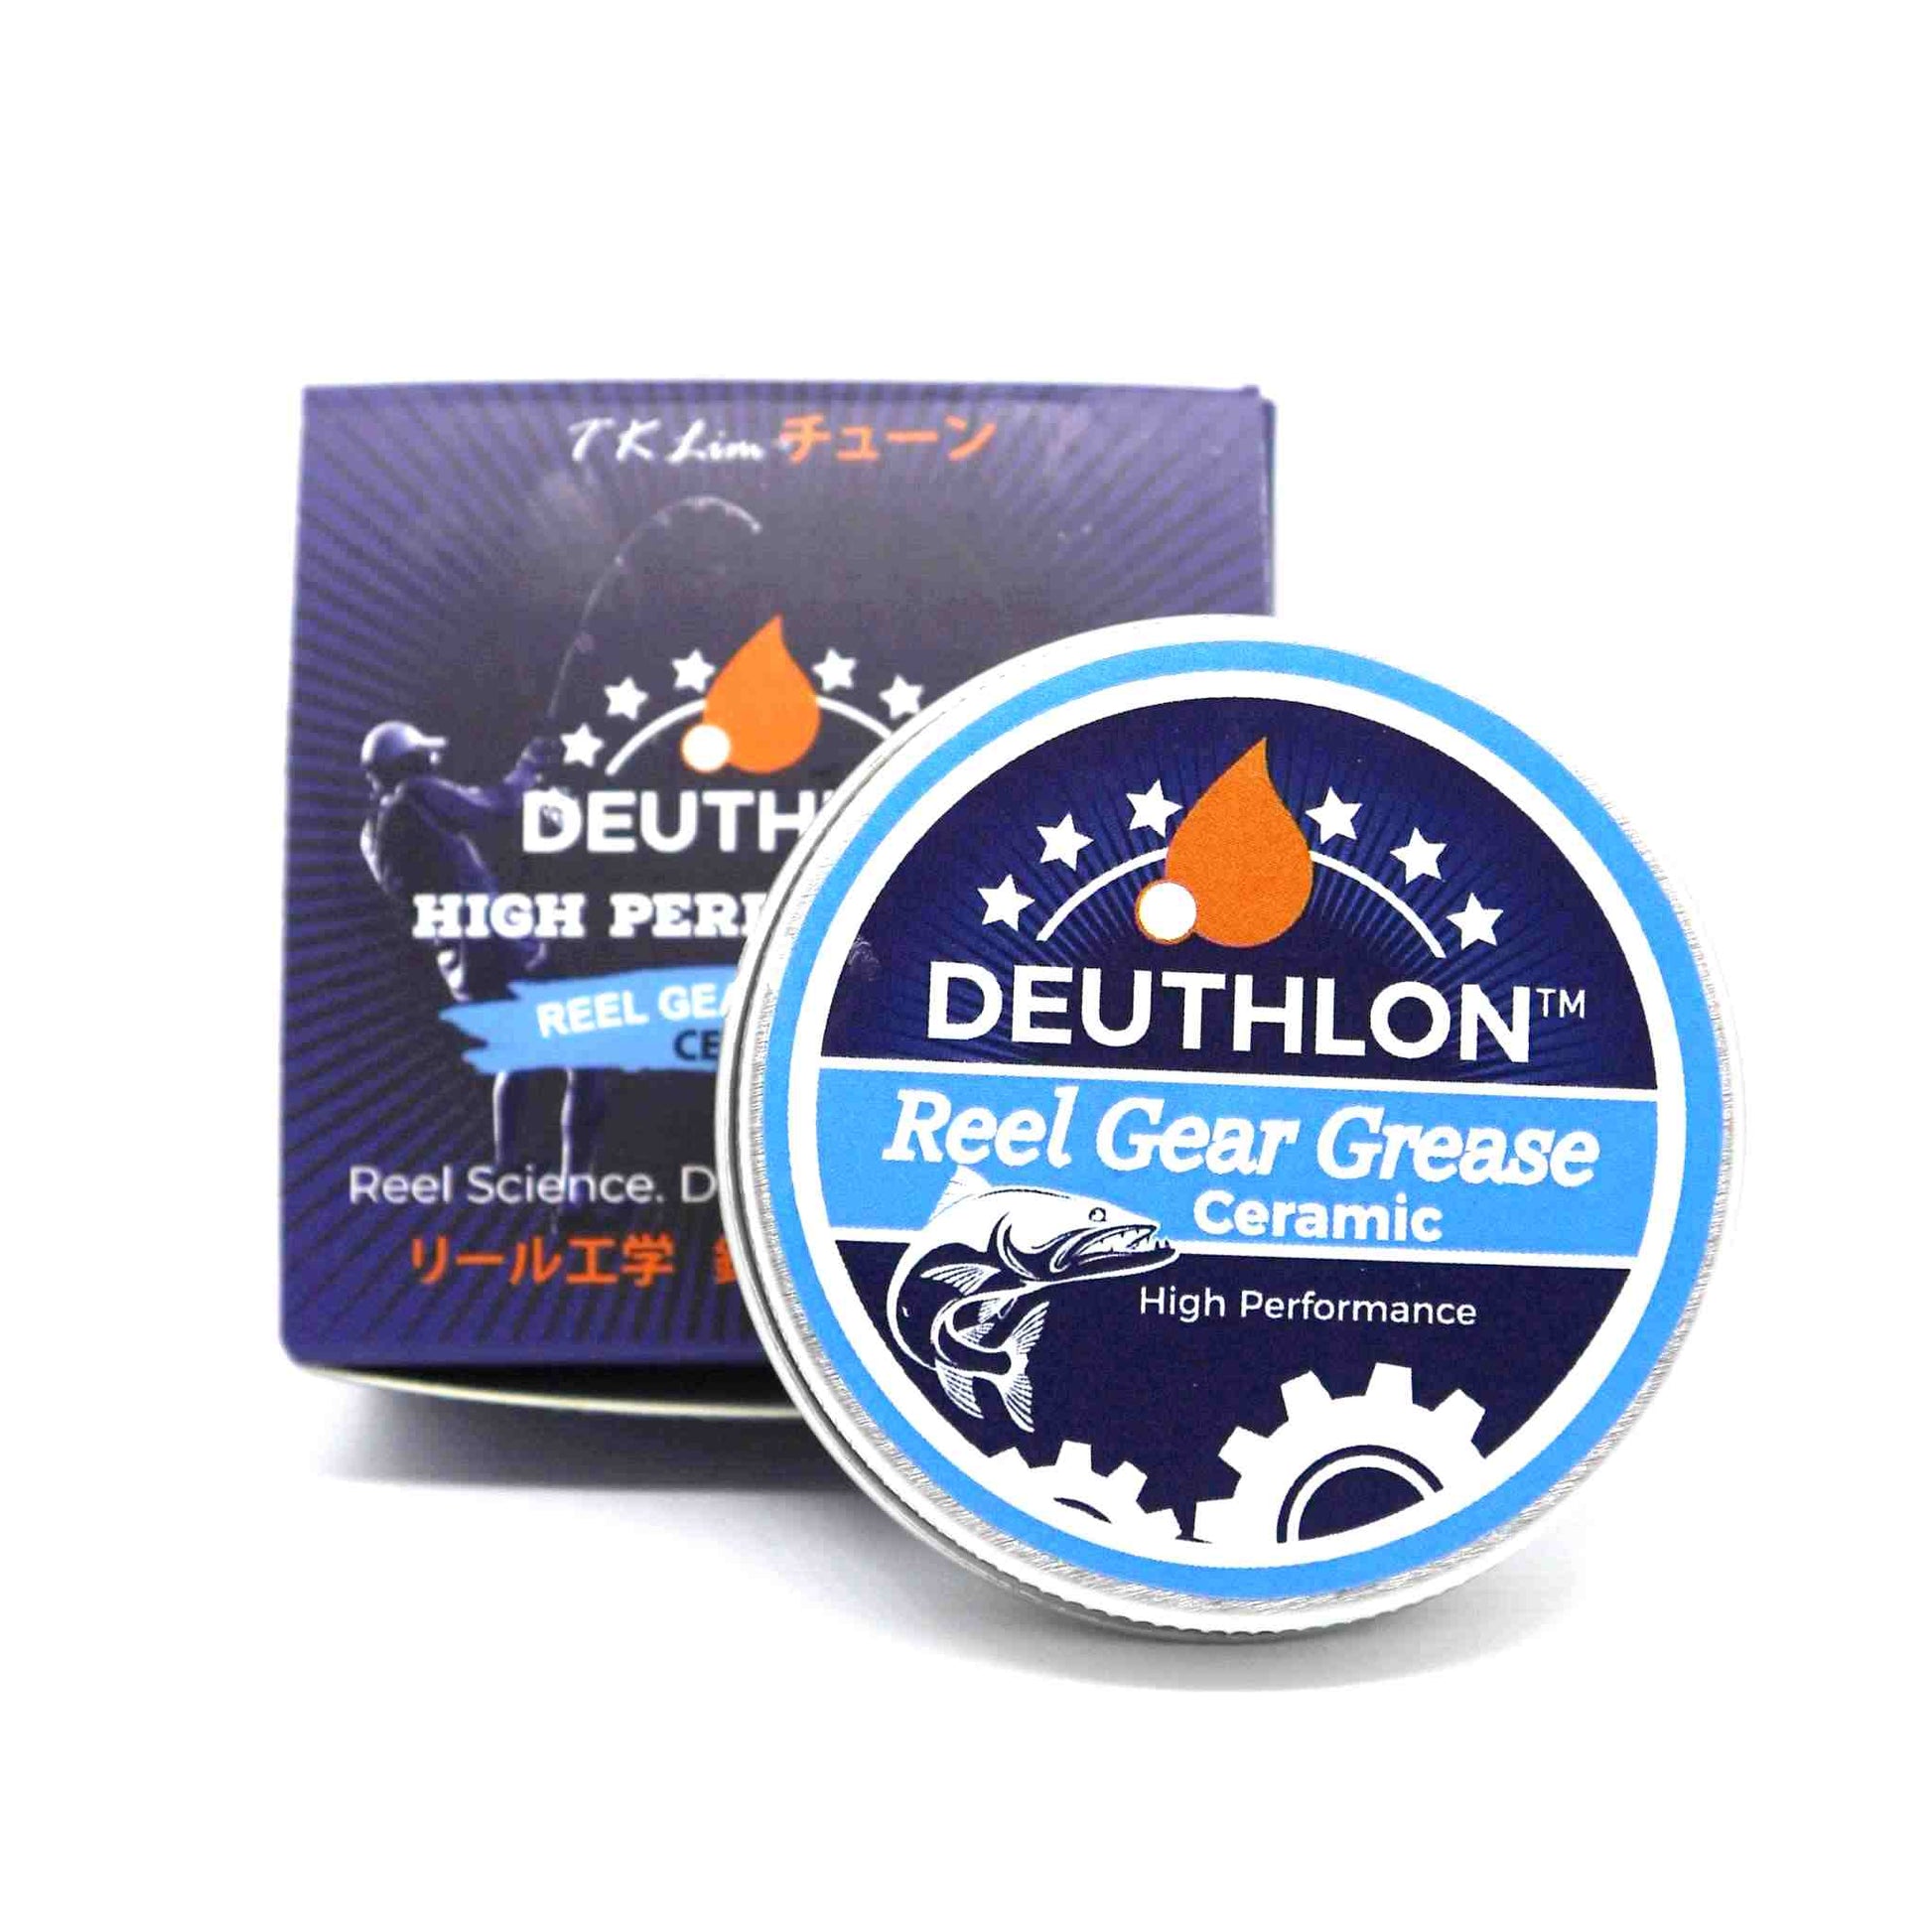 DEUTHLON Reel Gear Ceramic Grease | True protection with sticking to gears even under EXTREME PRESSURE - Deuthlon